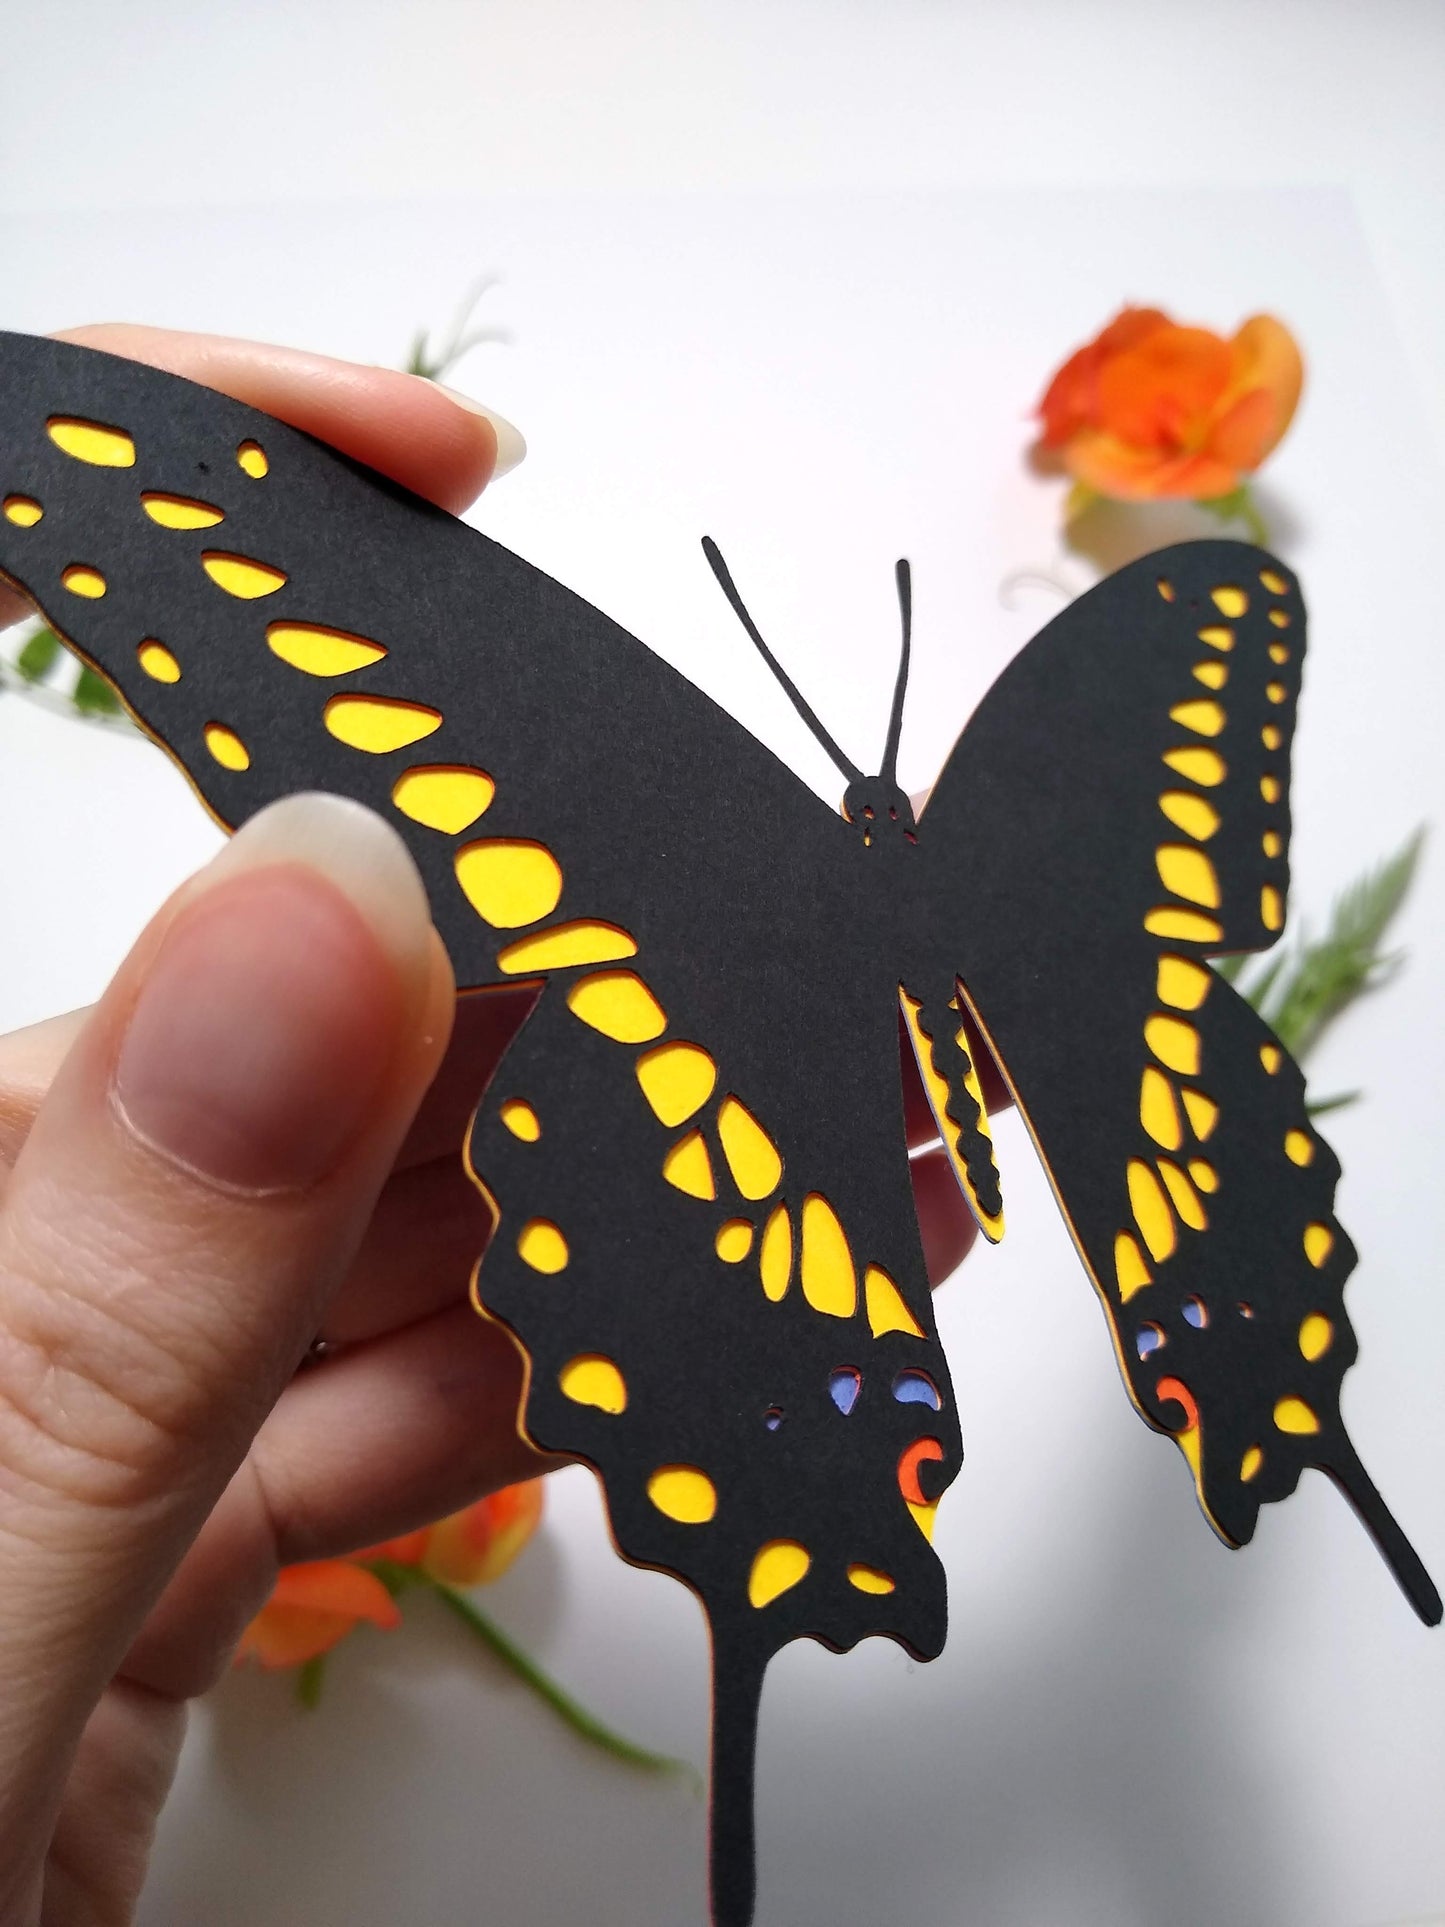 A hand holds a multi-layered paper butterfly to the camera, in the design of a Black Swallowtail butterfly. In the background are several sprigs of leaves and a small orange flower.